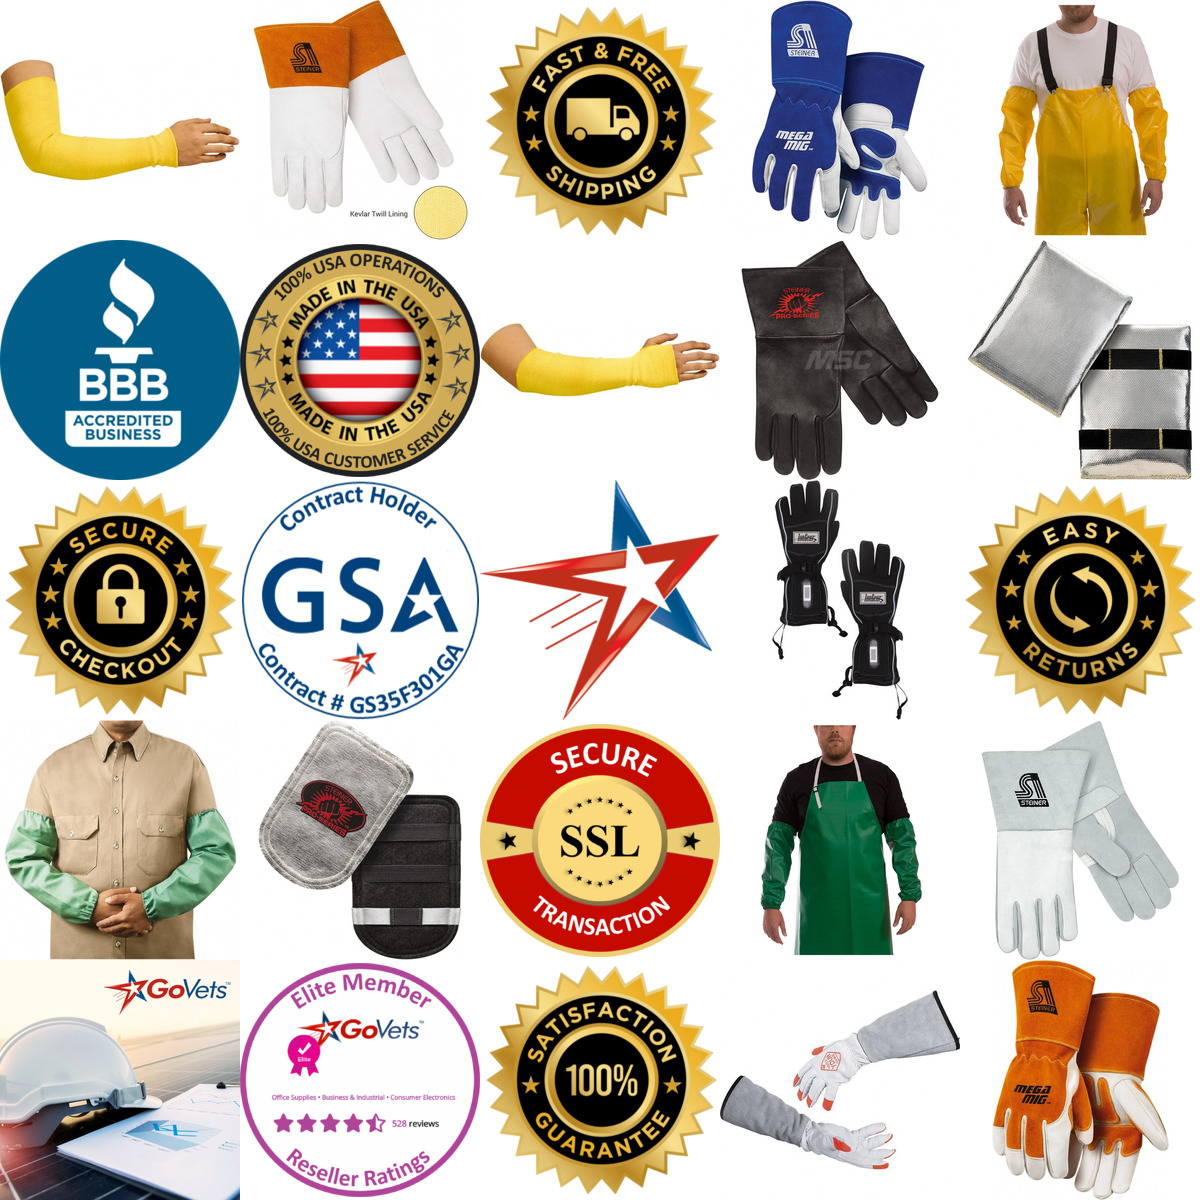 A selection of Work Clothing and Outerwear products on GoVets